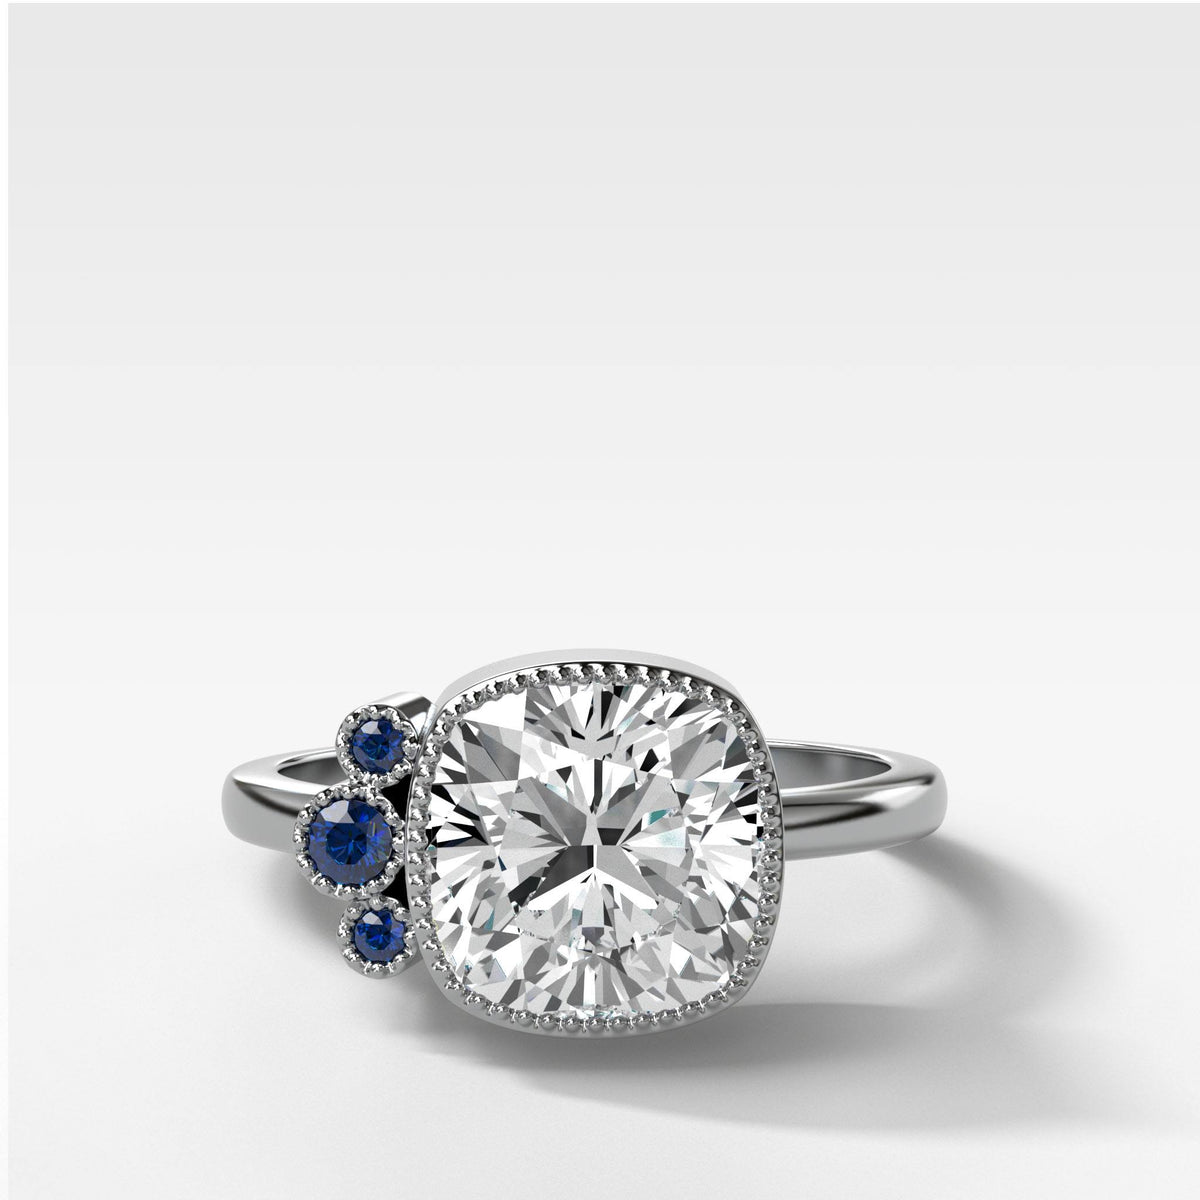 Blue Cluster Engagement Ring With Cushion Cut by Good Stone in White Gold